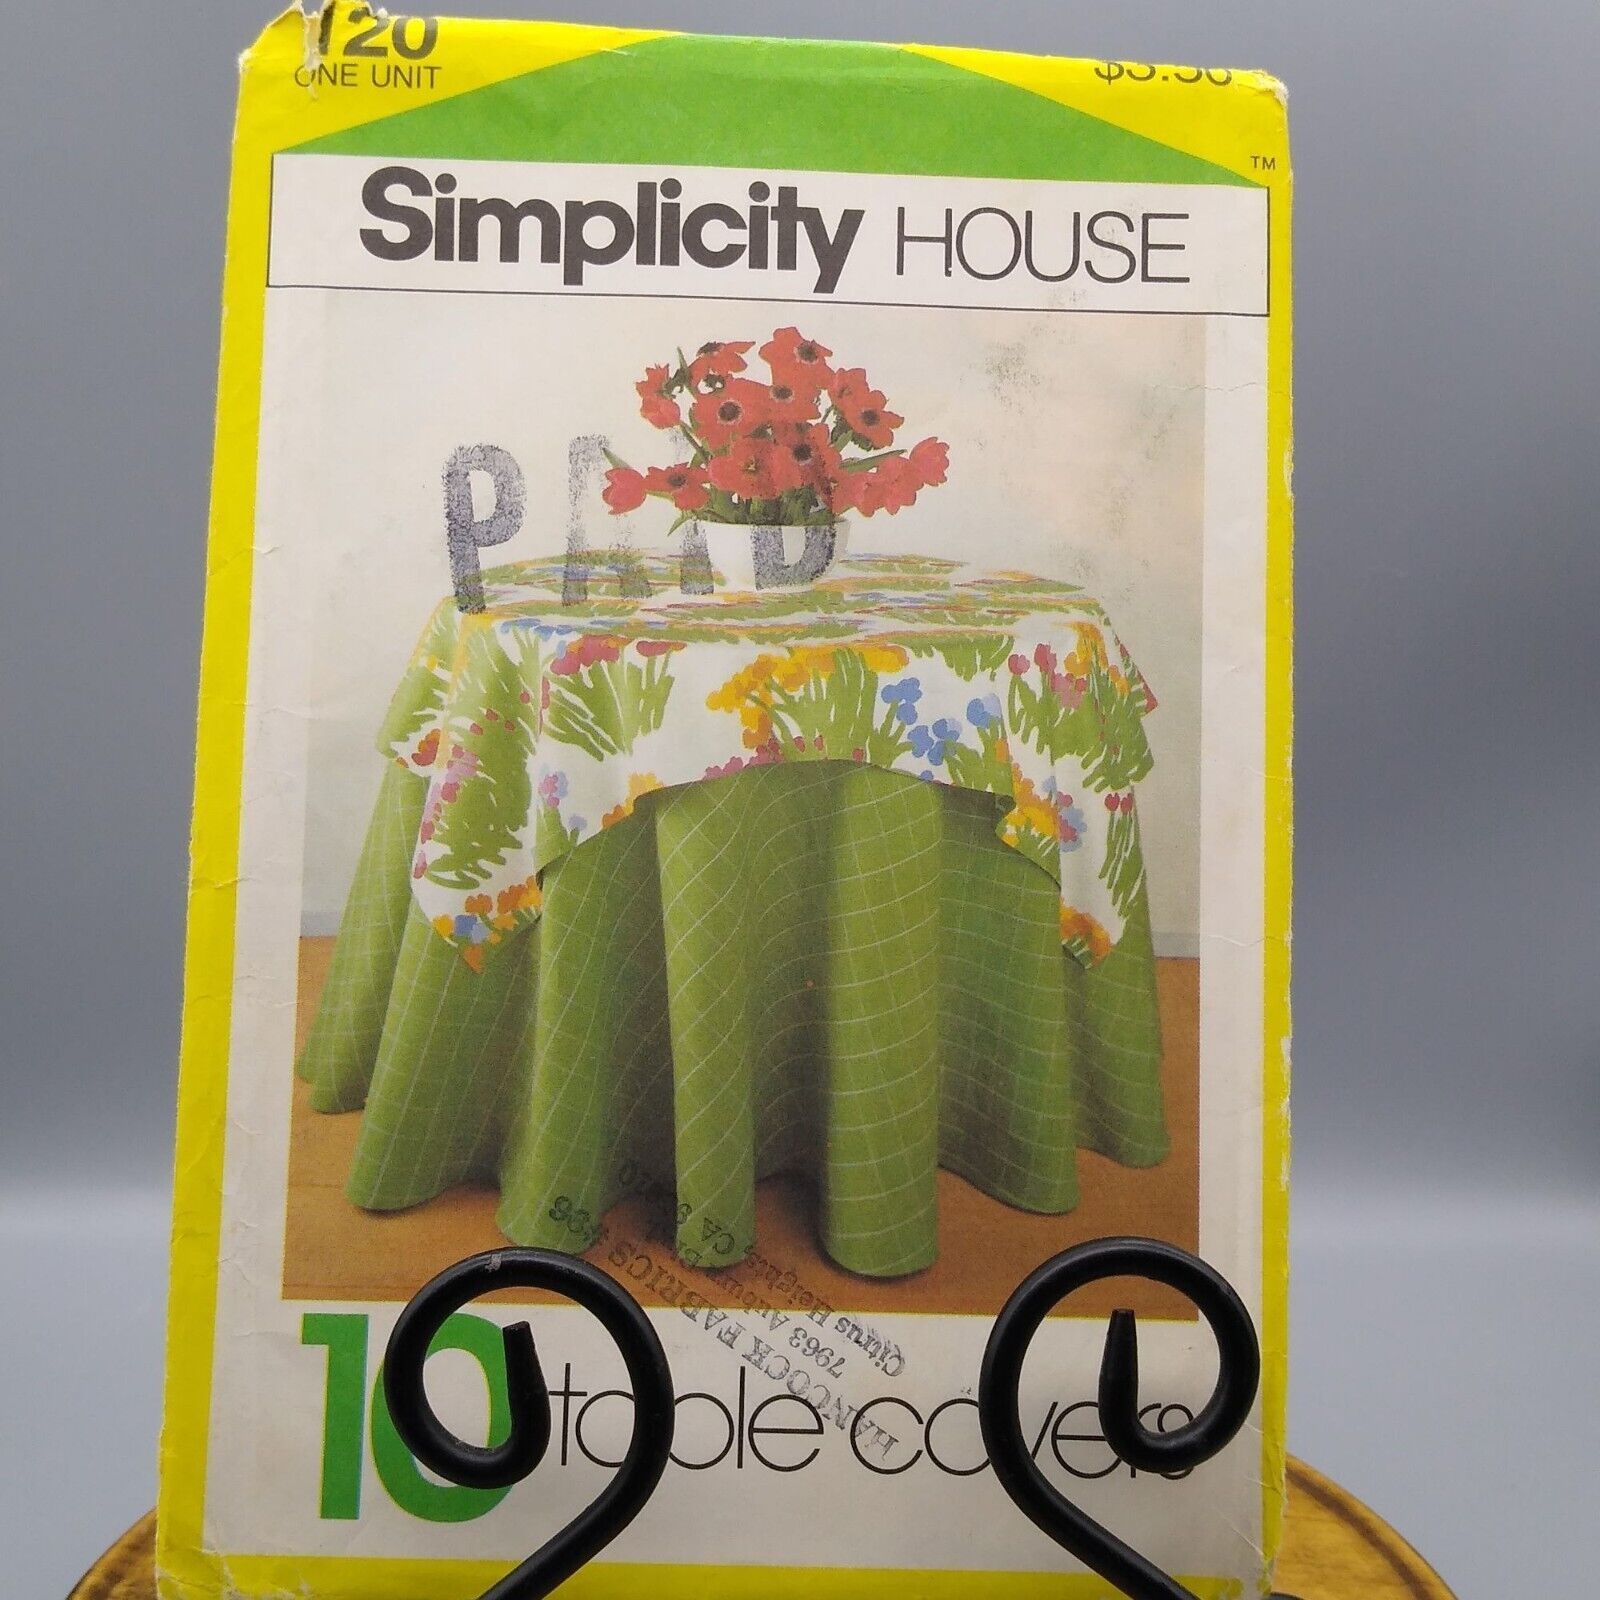 Primary image for UNCUT Vintage Sewing PATTERN Simplicity House 120 One Unit, 1981 Crafts